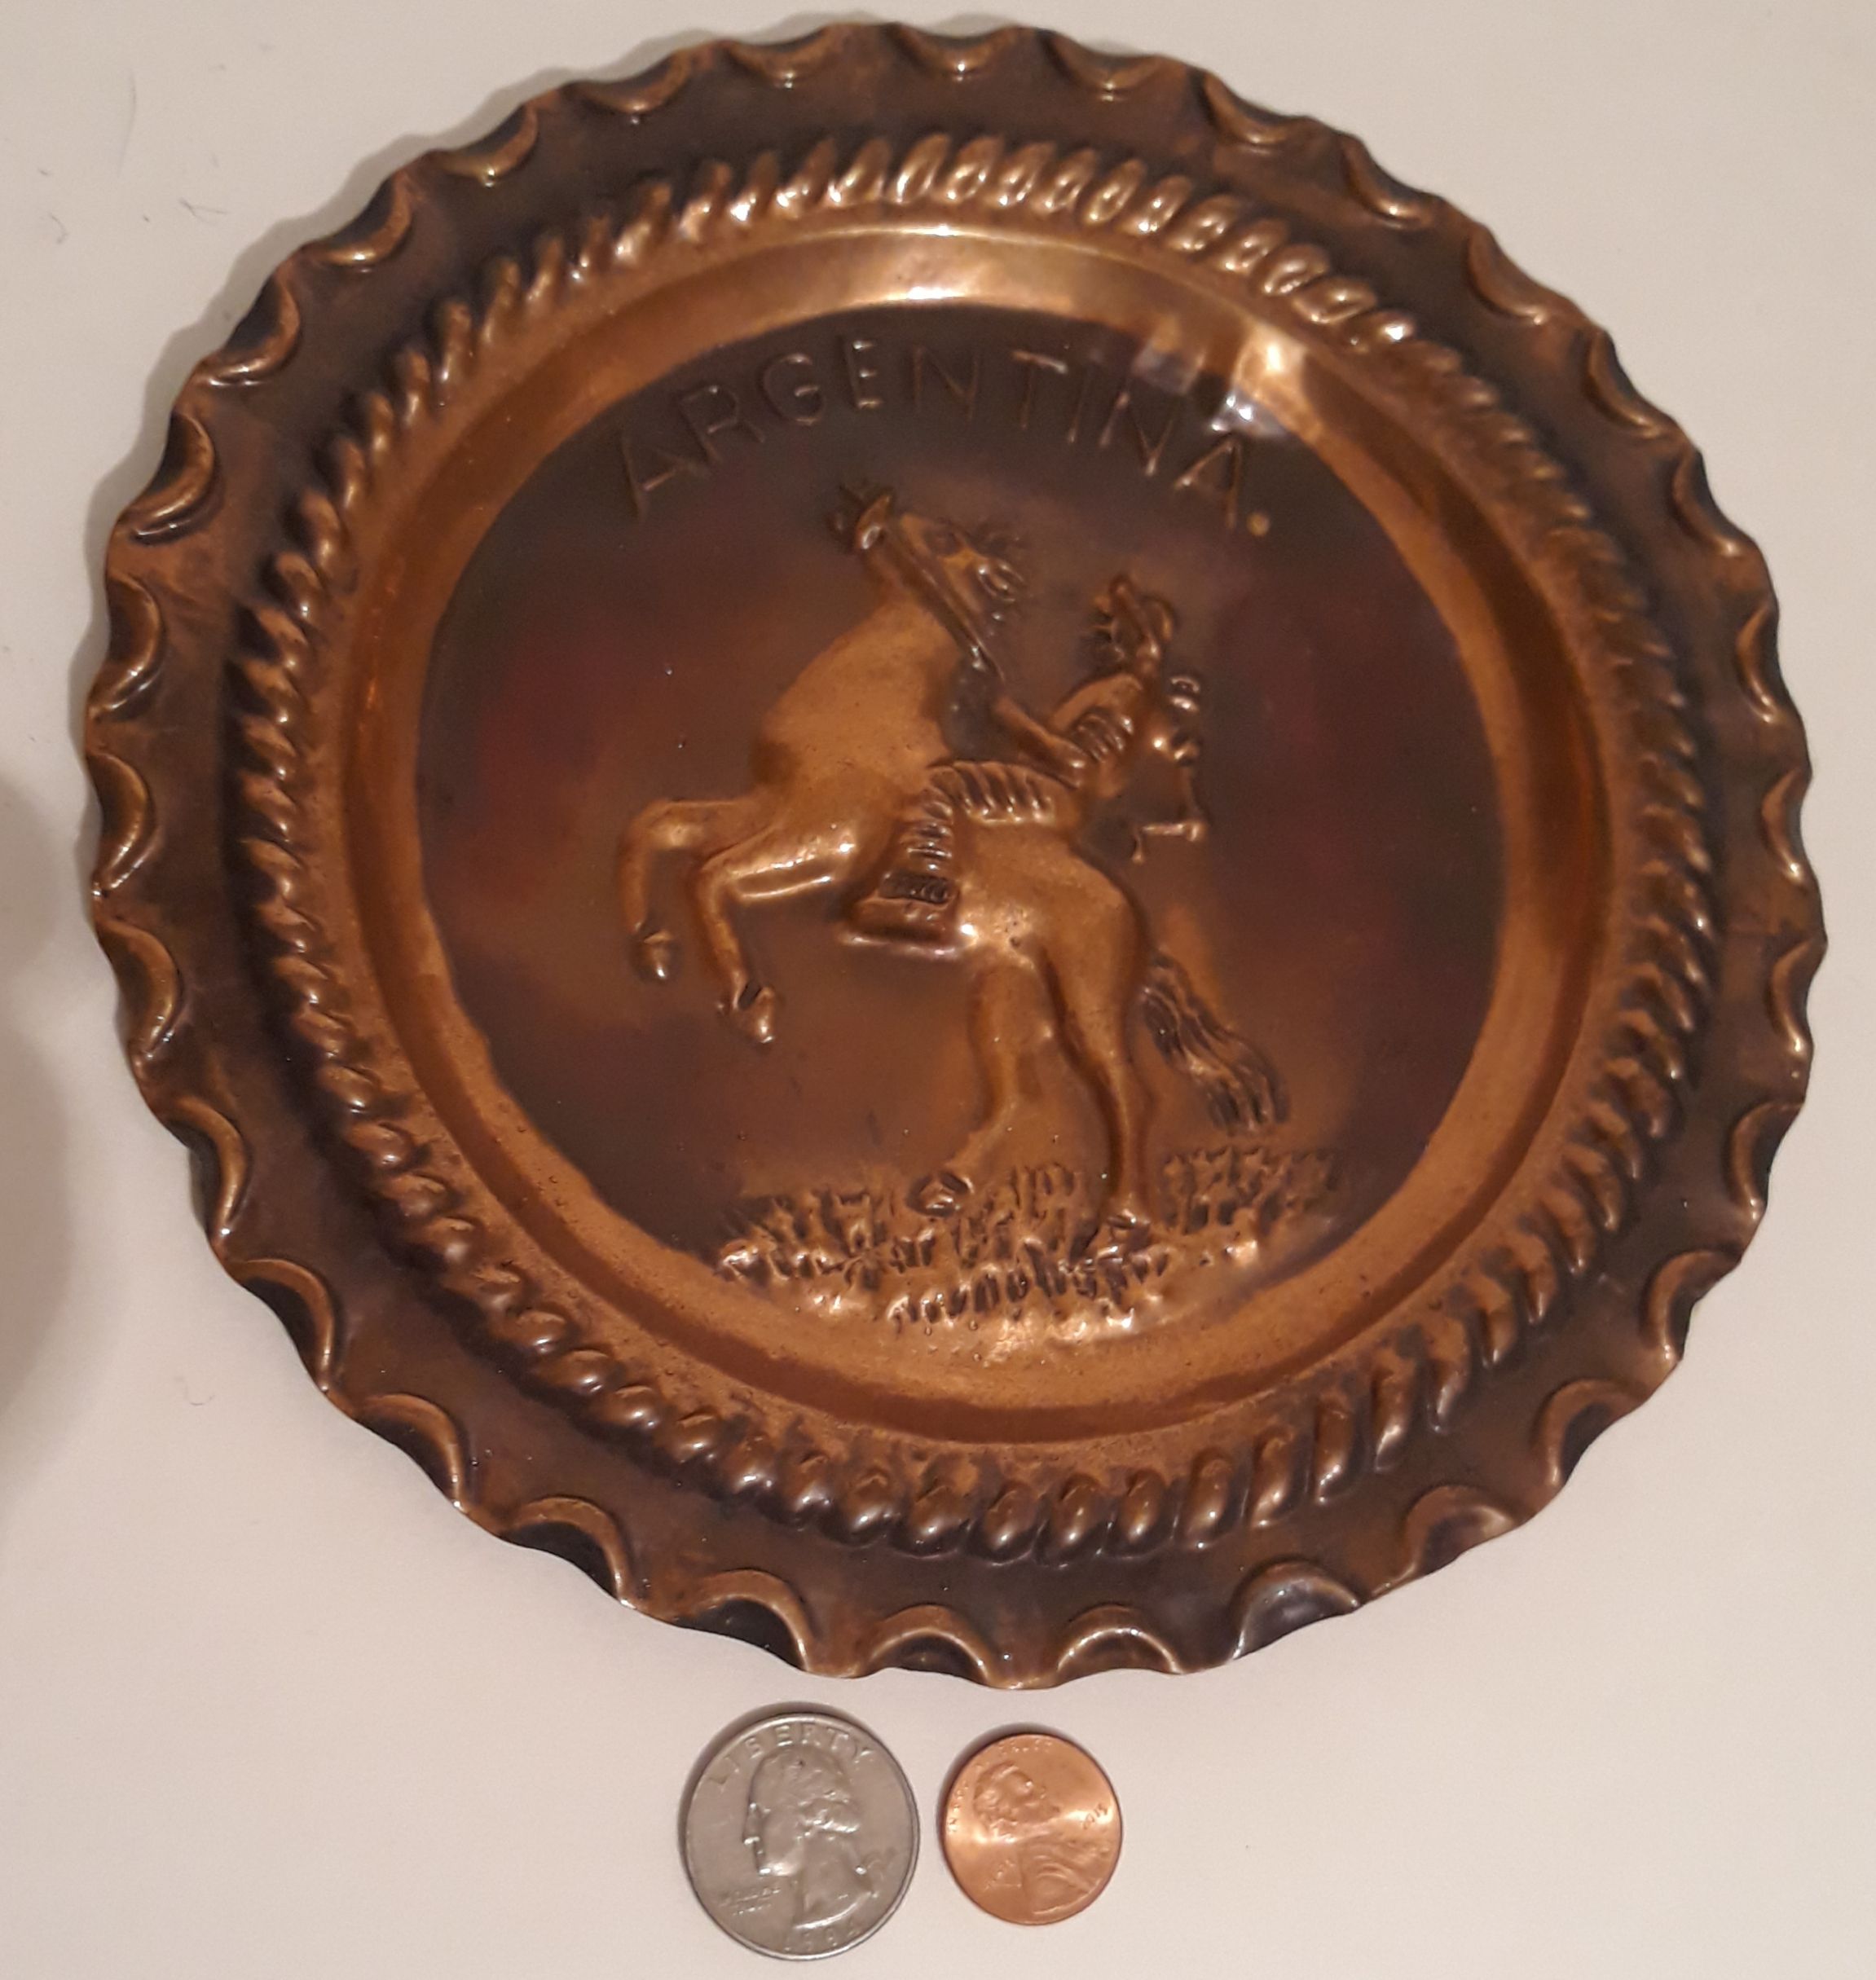 Vintage Copper Metal Wall Hanging Plate, Home Decor, Argentina, 7 1/2" Wide, Horse, Wall Decor, Shelf Display, This Can Be Shined Up Even More